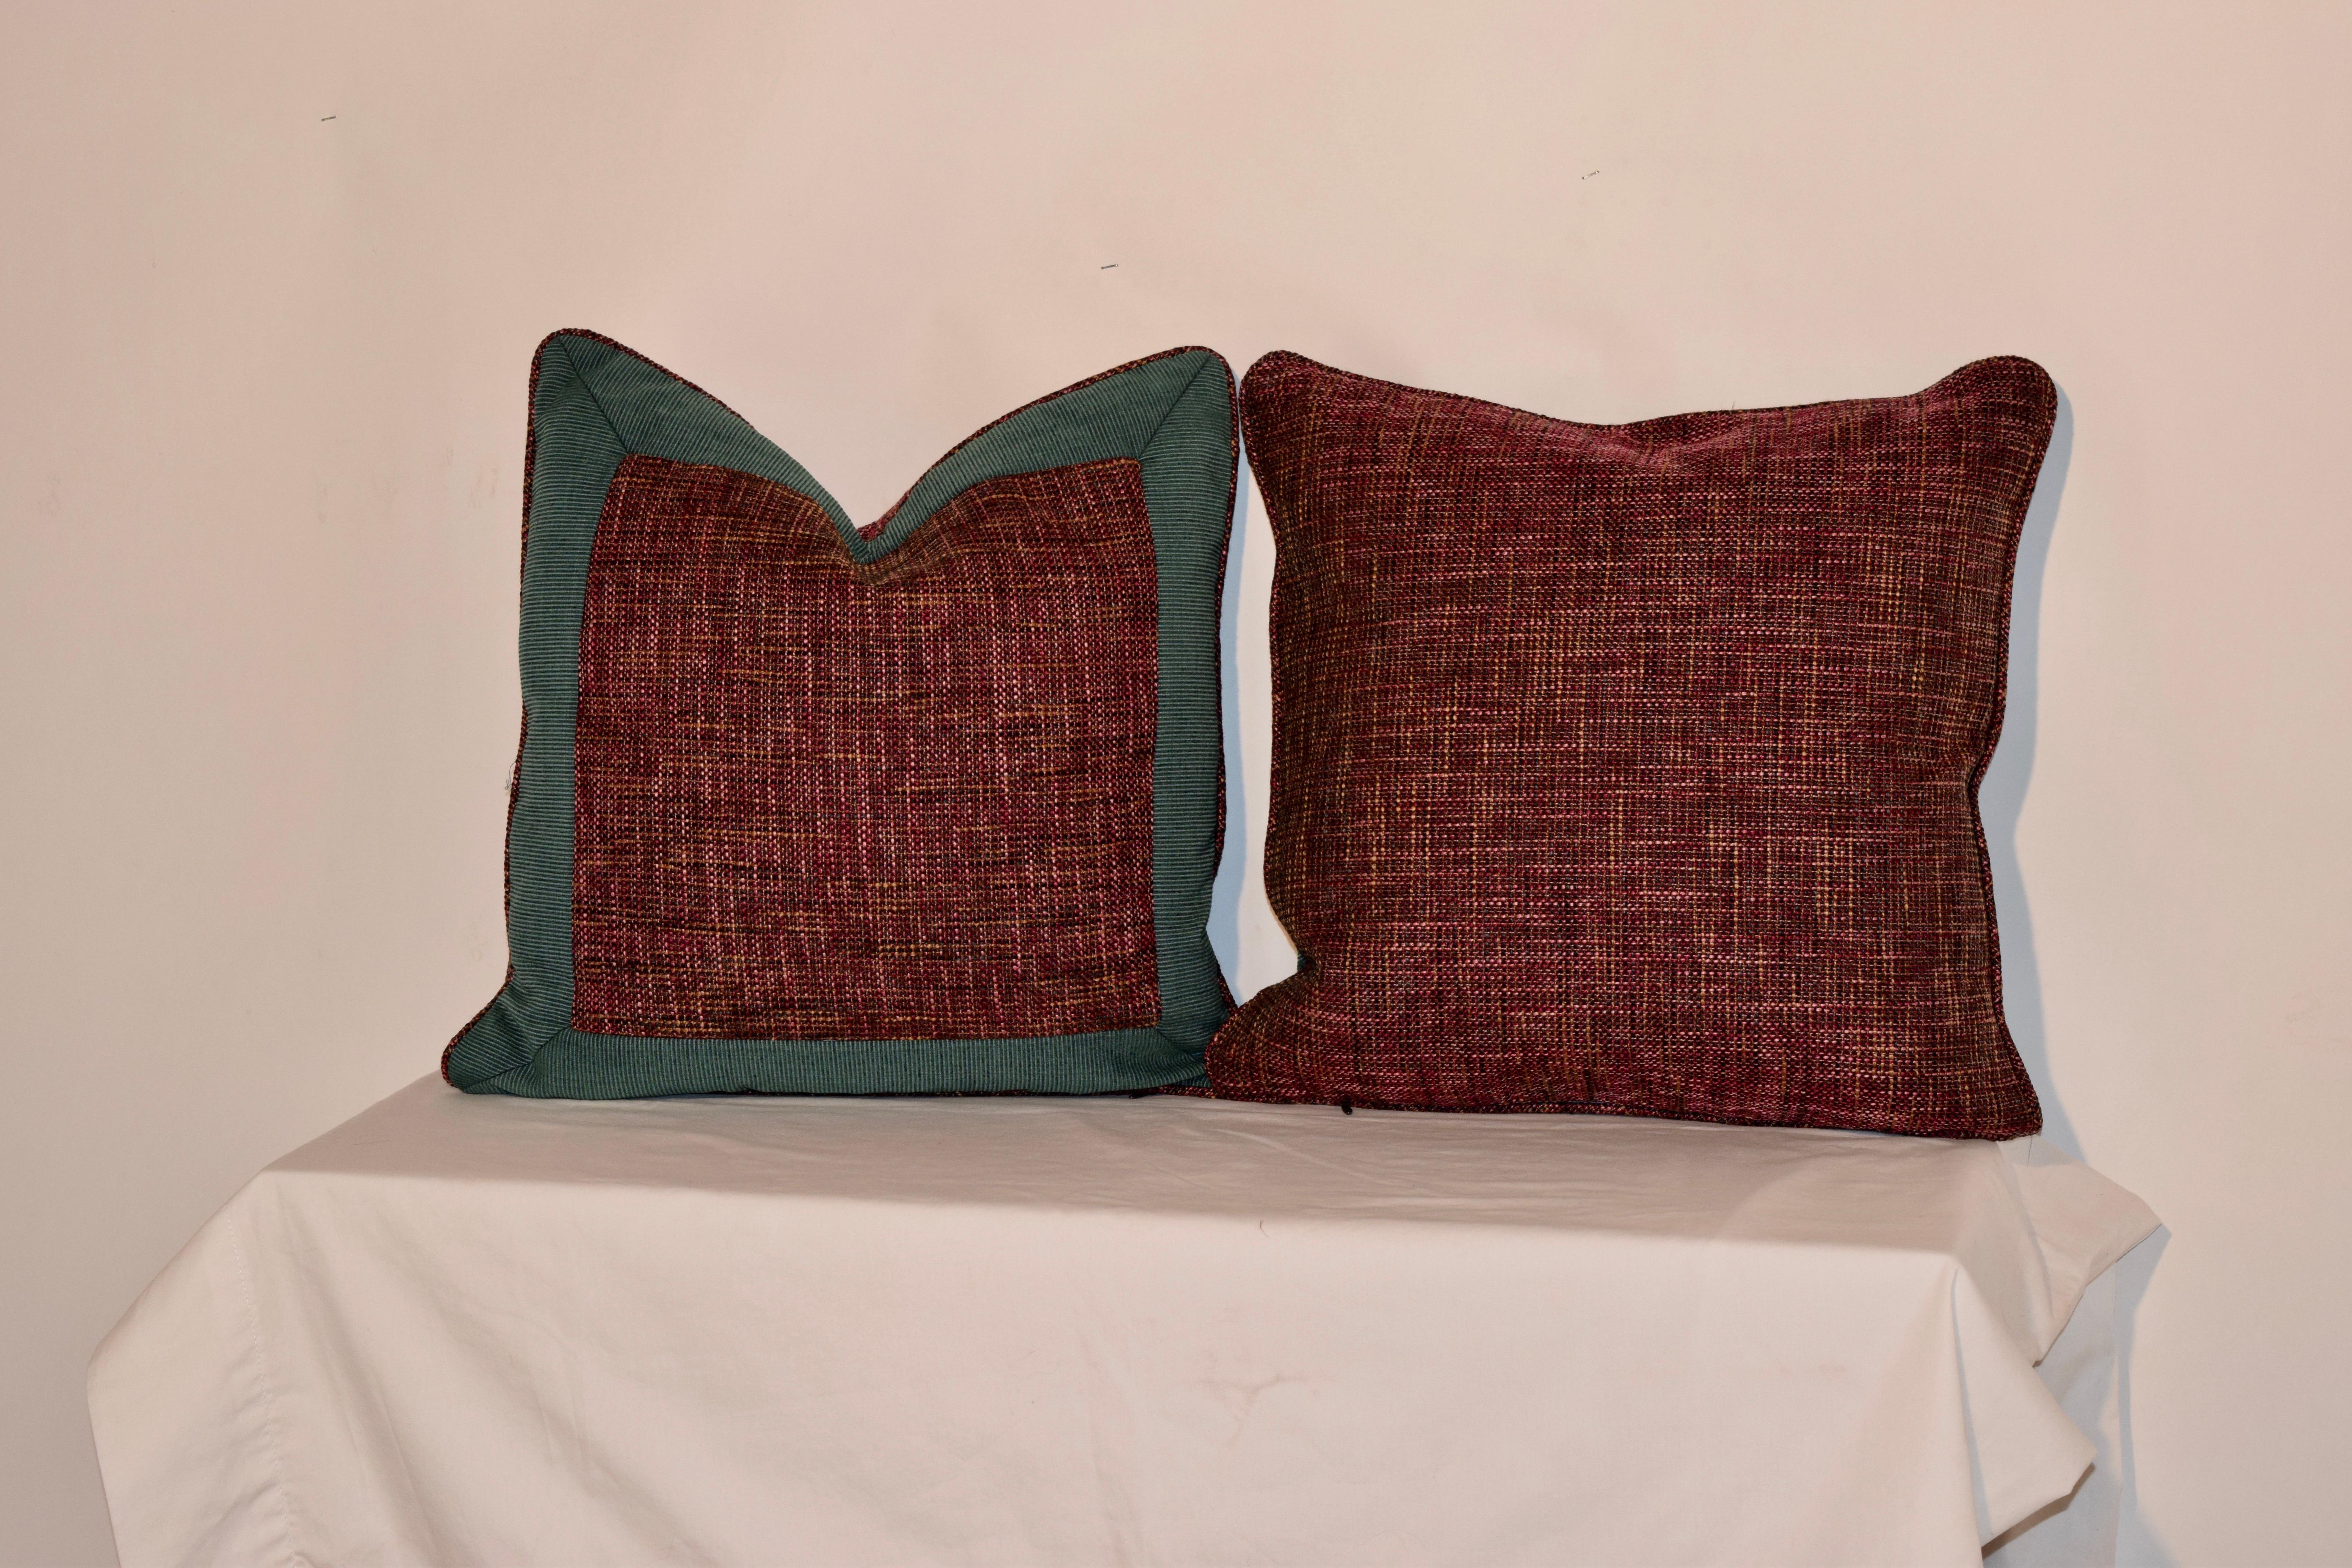 Hand-Crafted Handmade Bordered Pillows For Sale